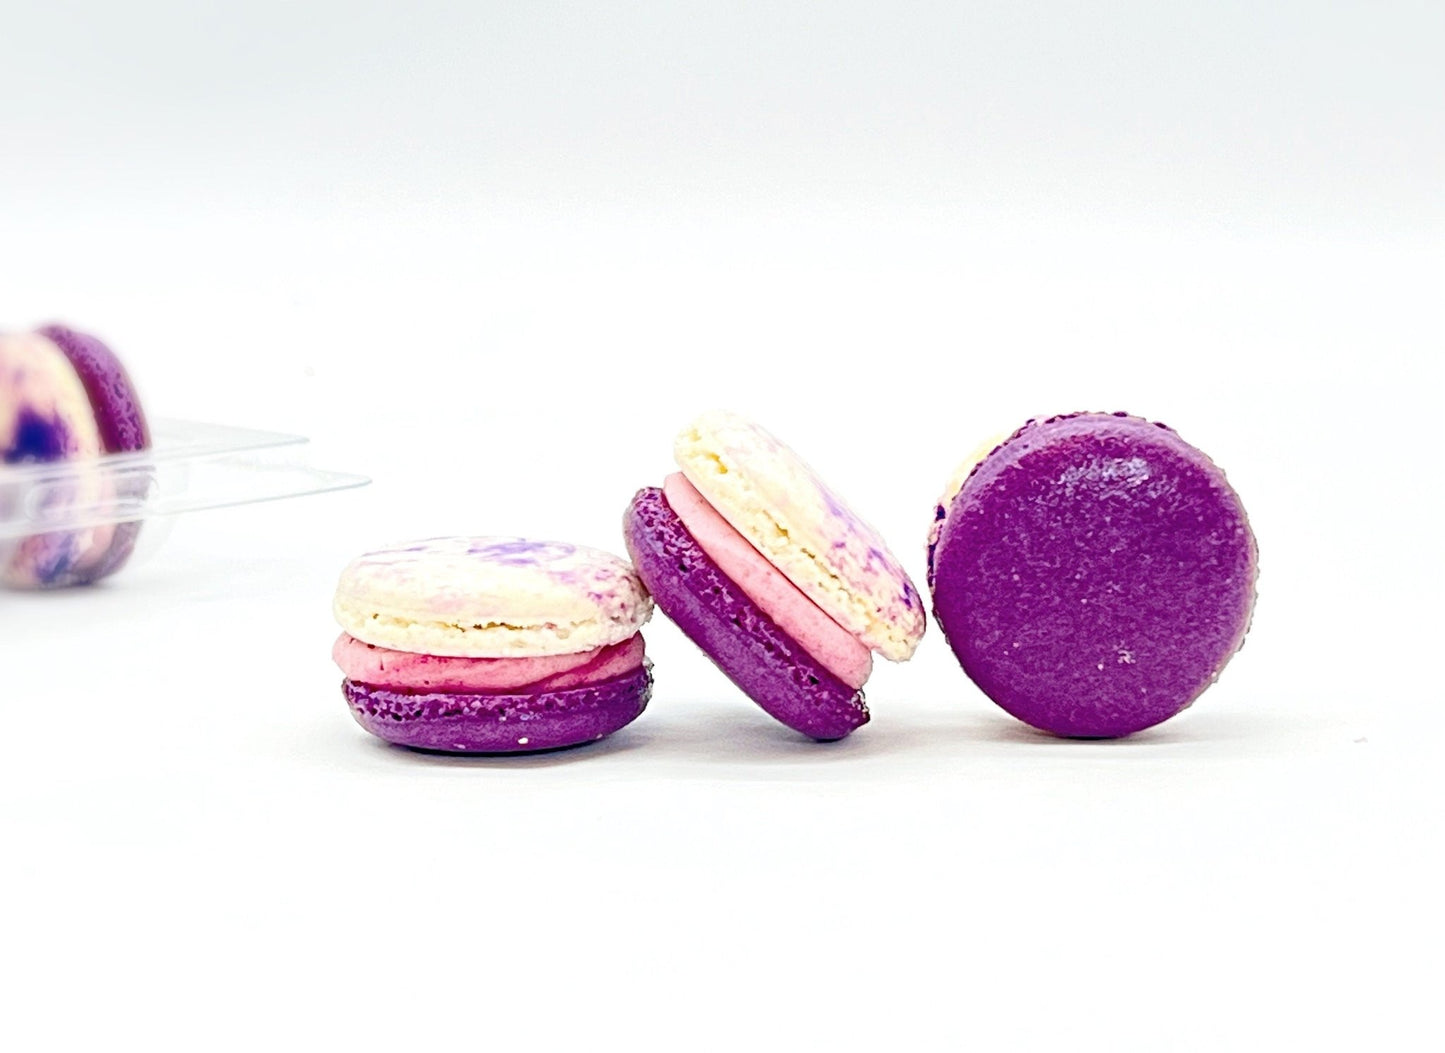 50 Pack Ube White Chocolate French Macaron Value Pack - Macaron Centrale